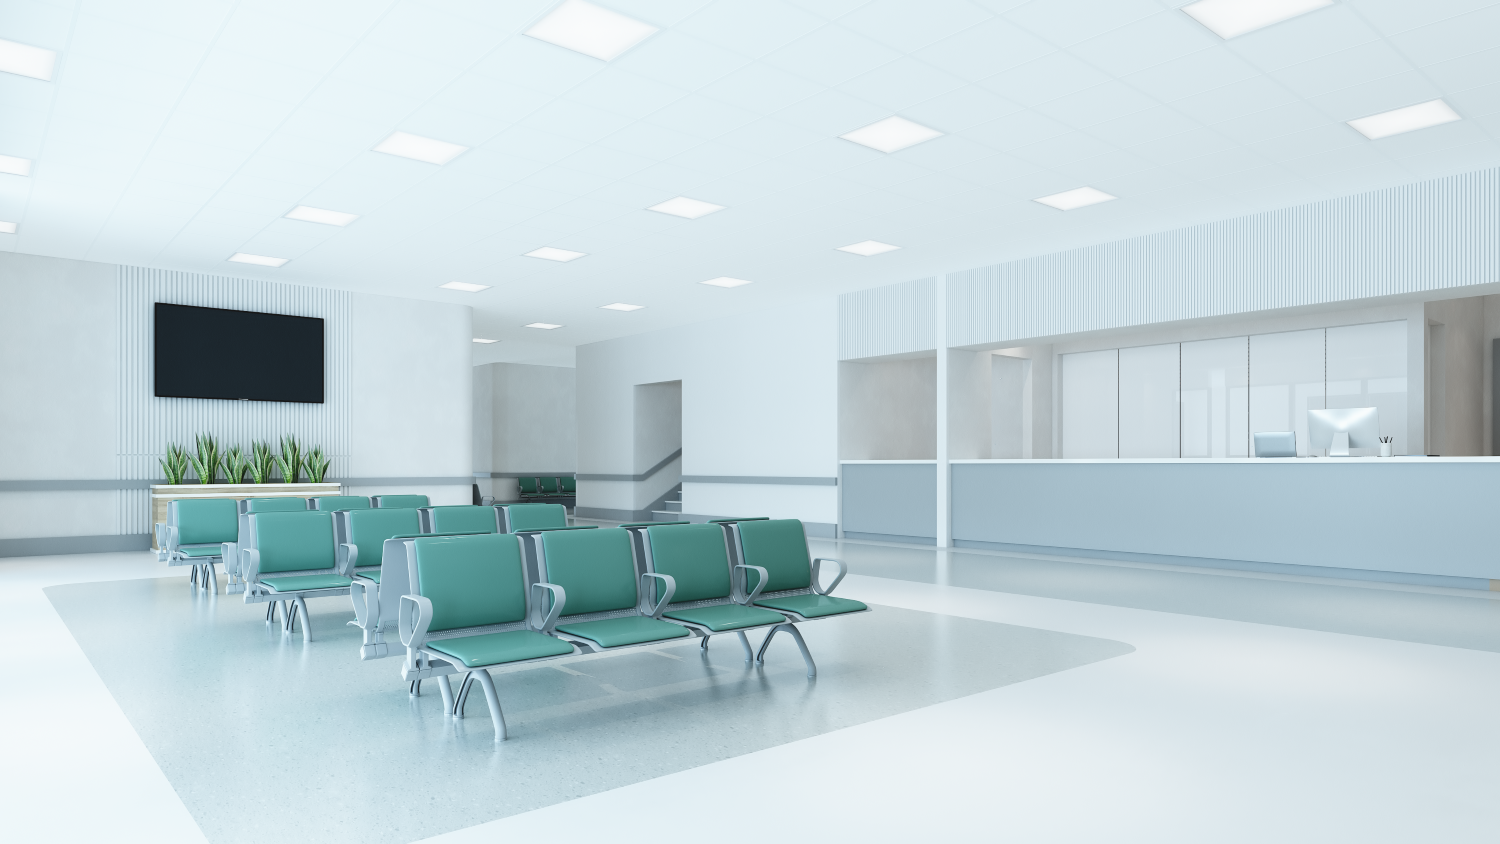 Hygenic design for safer healthcare spaces